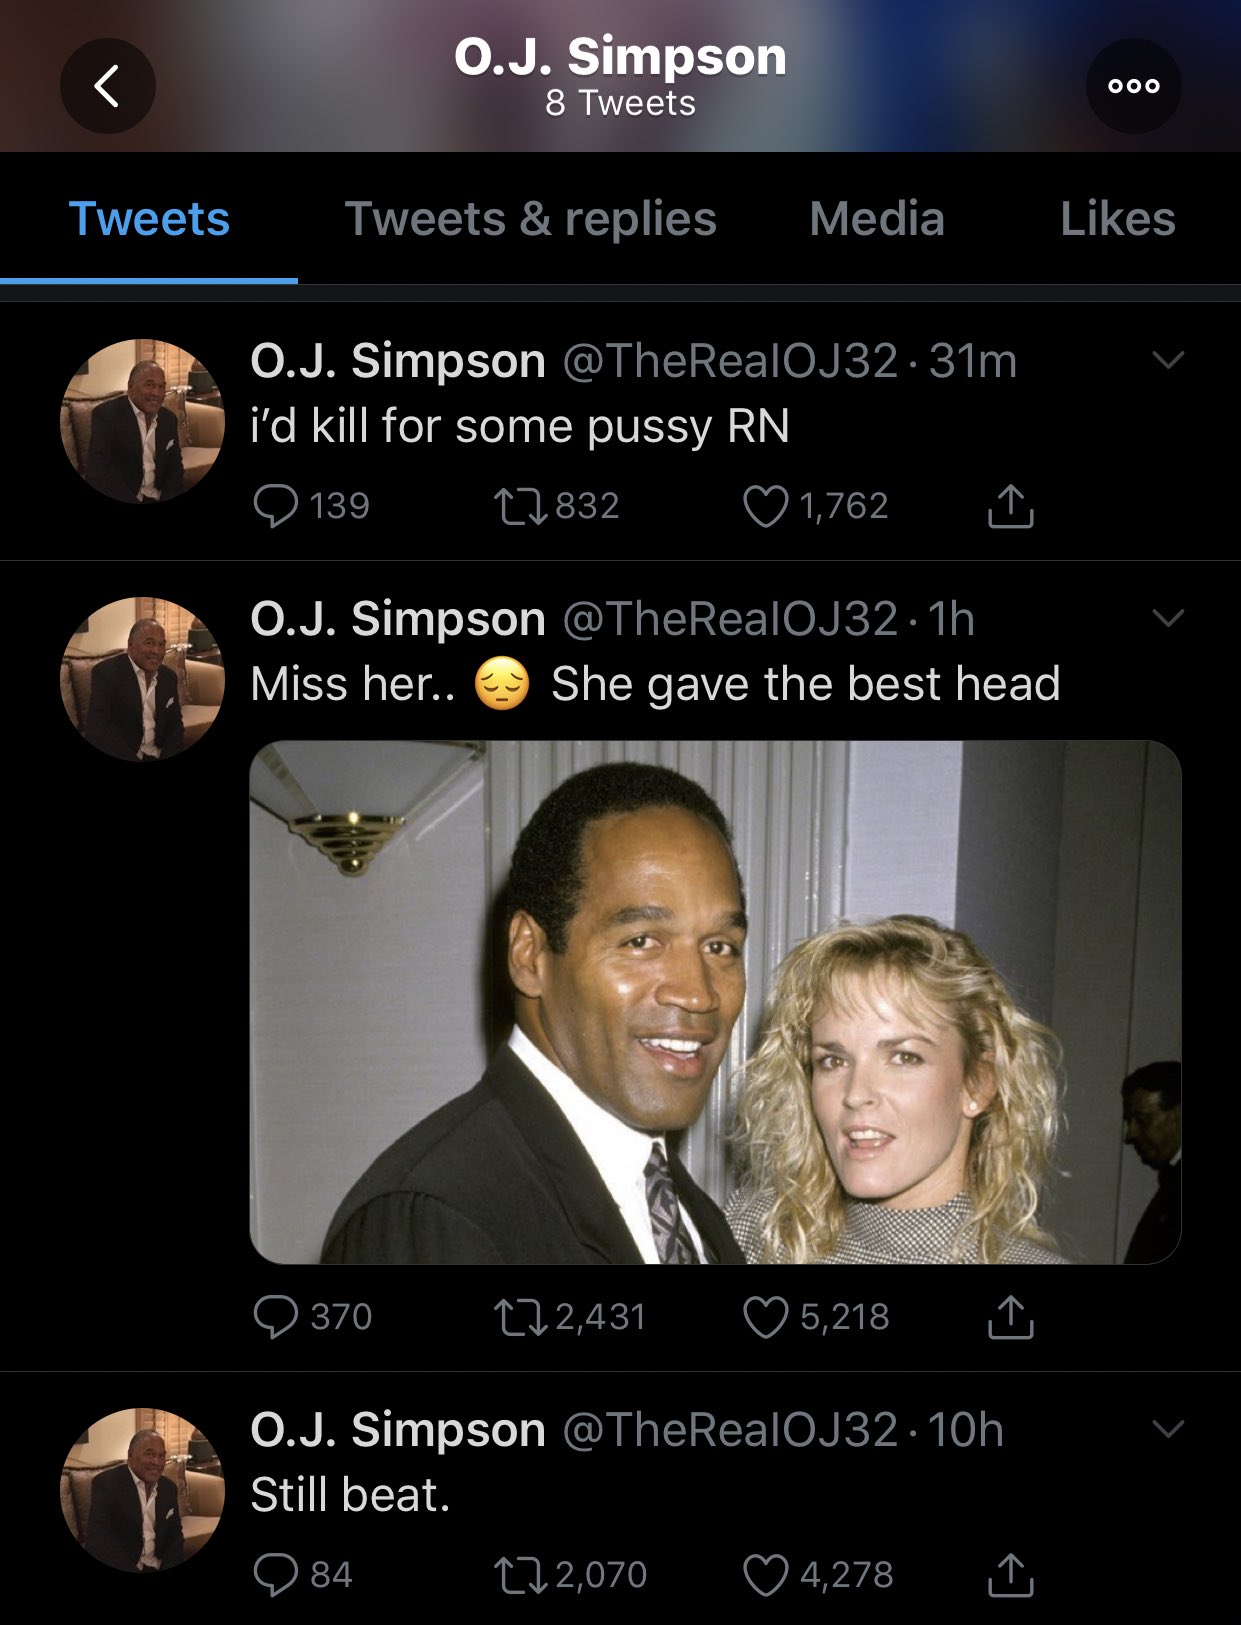 Heavenly Controller Pa Twitter I Don T Know Whether This Is Funny Or Disturbing Or A Little Bit Of Both At The Fact That This Is The Real Oj Simpson Tweeting These